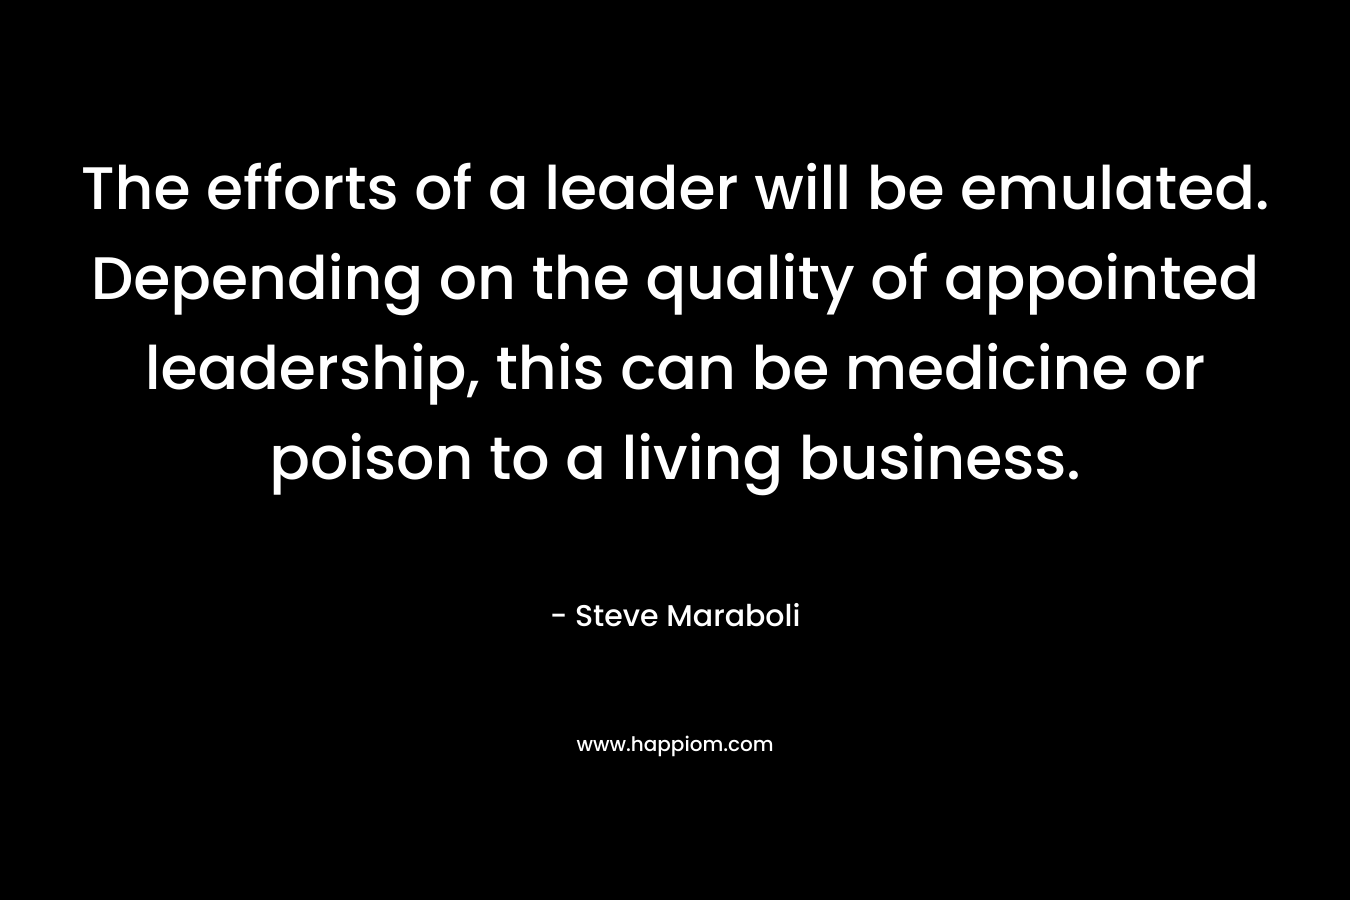 The efforts of a leader will be emulated. Depending on the quality of appointed leadership, this can be medicine or poison to a living business.